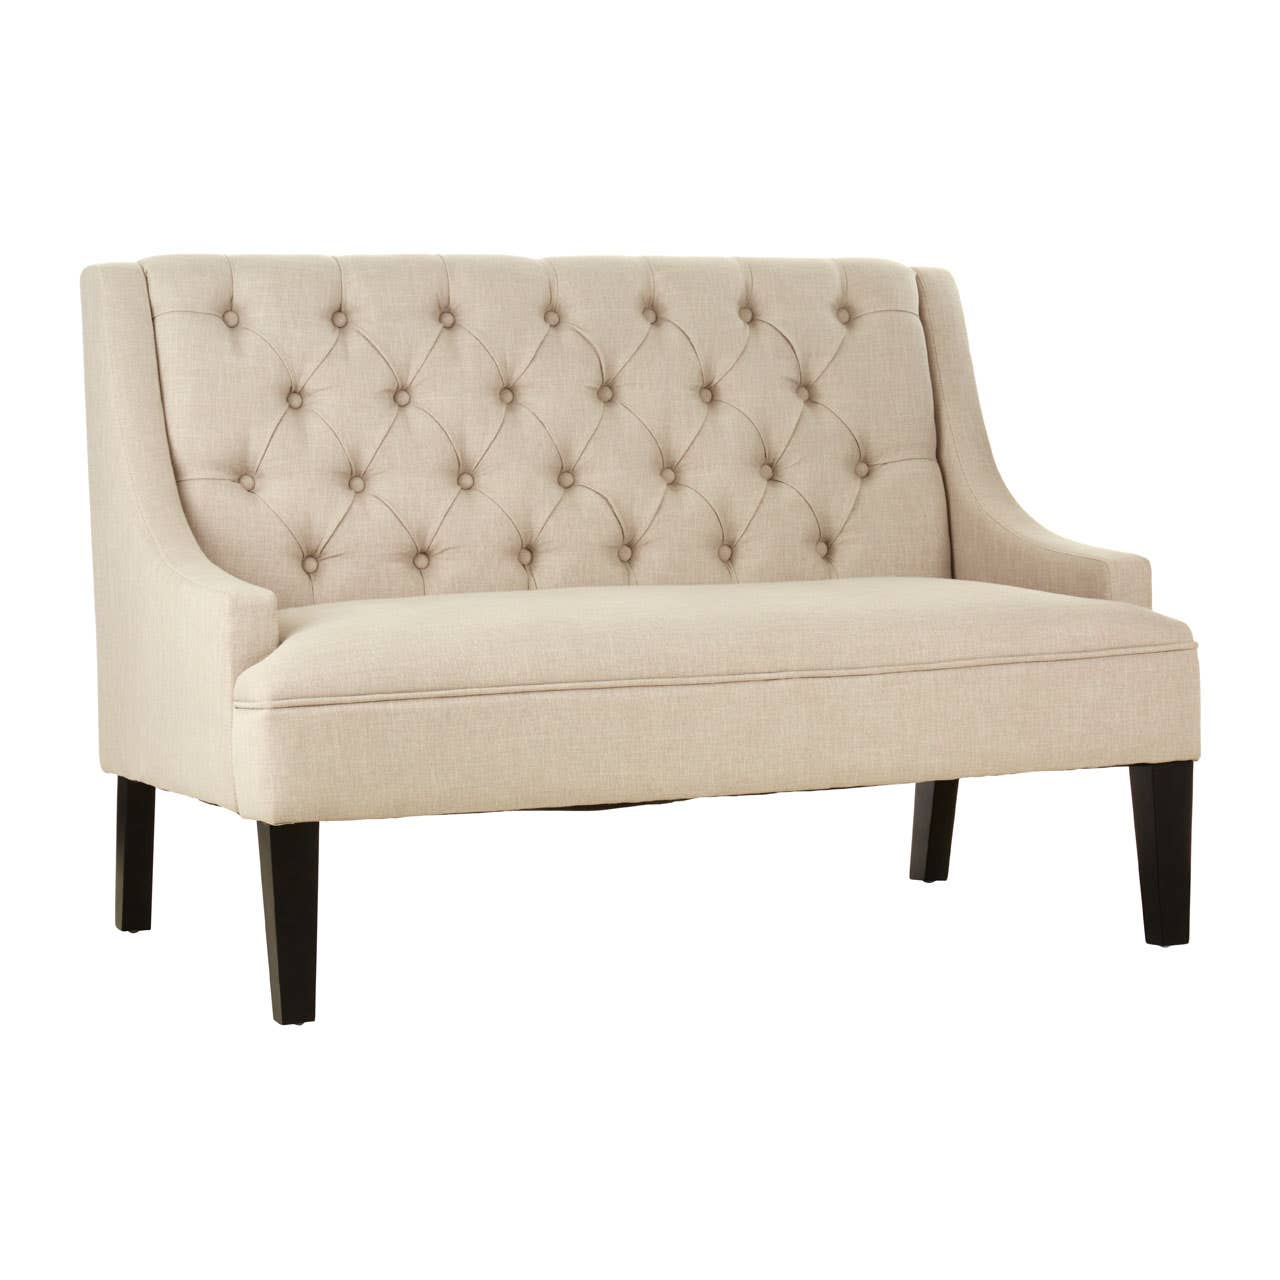 Marlow Vanilla Ice Cream High Back Classic Tufted Bench With Armrests